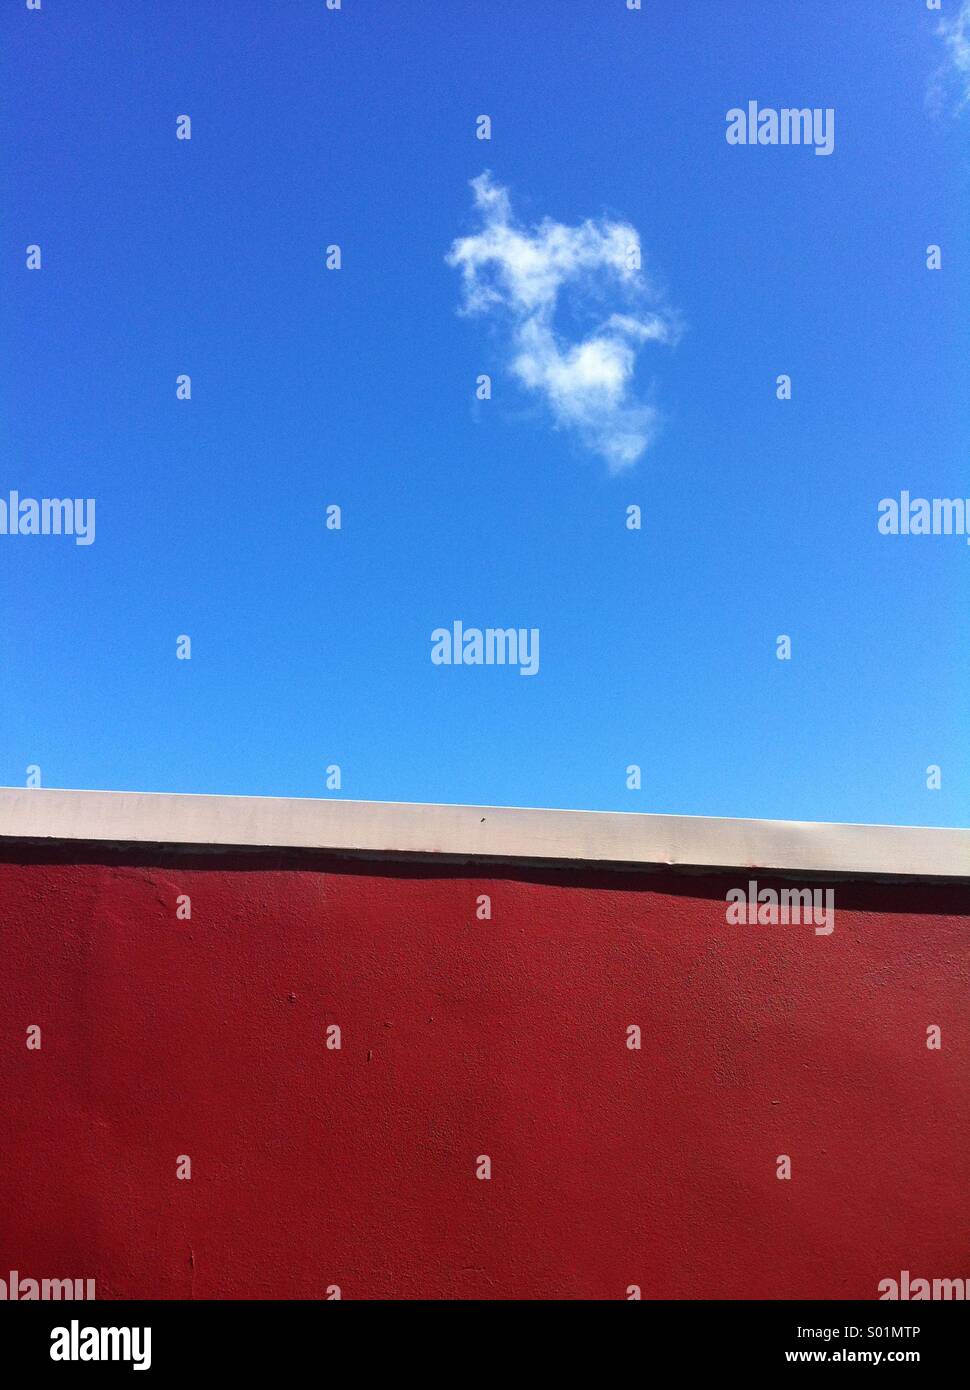 Red wall and blue sky with cloud Stock Photo